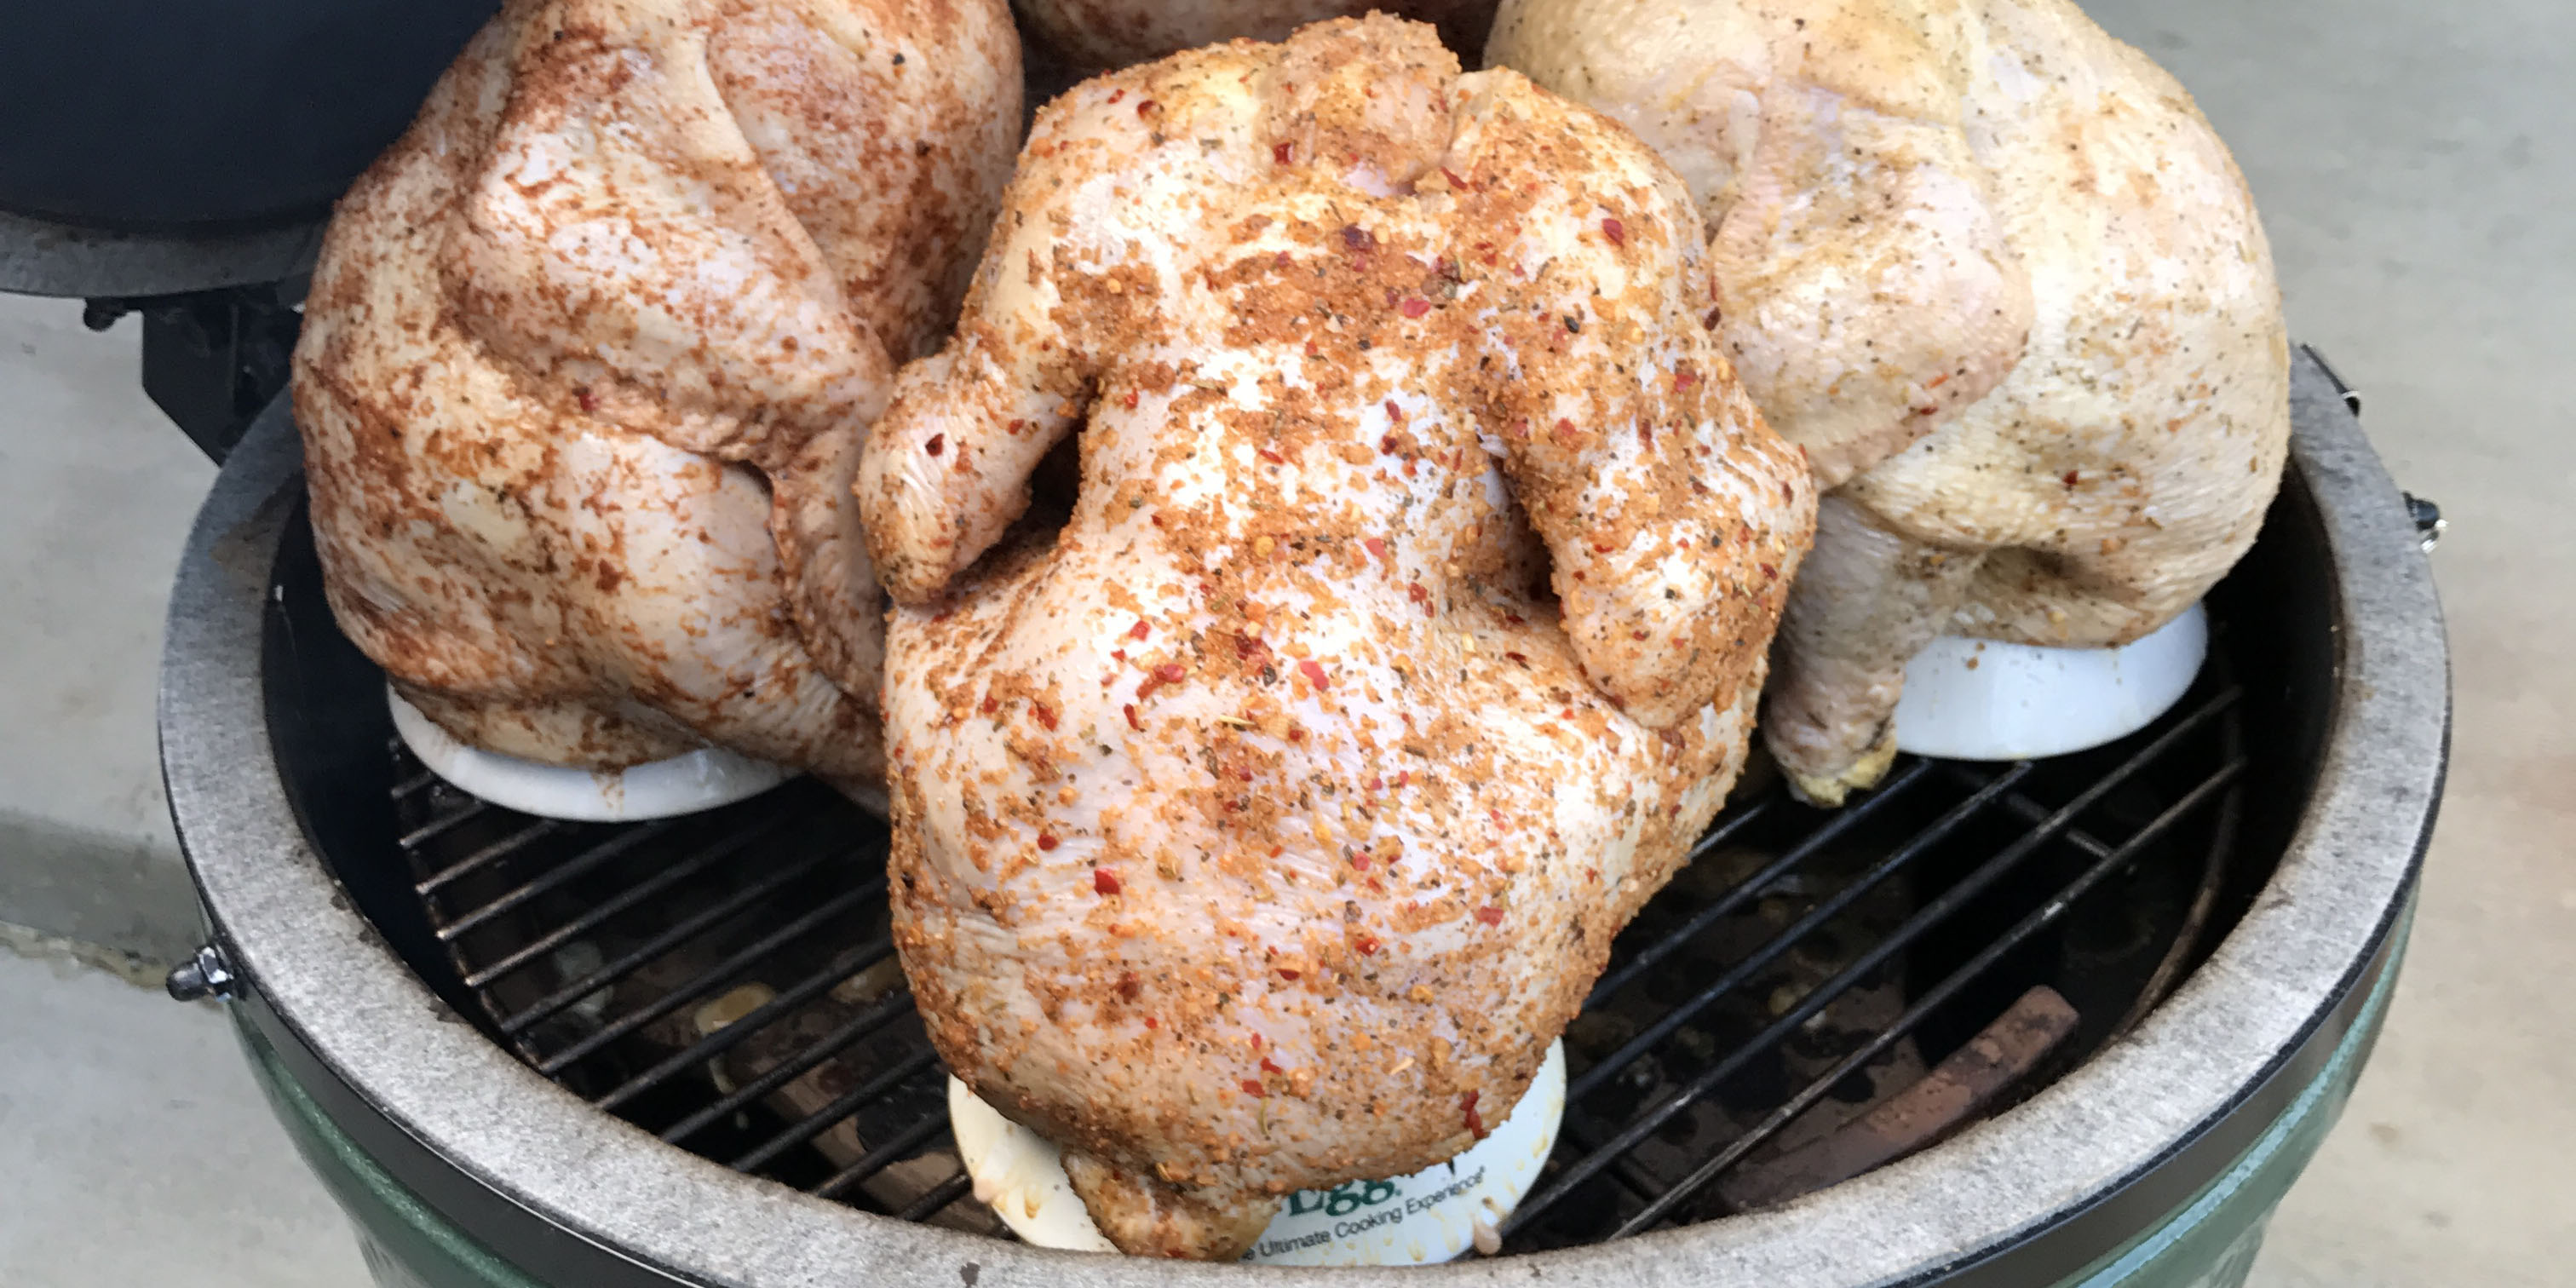 Crimson Moon Farm pastured Poultry Products on the grill